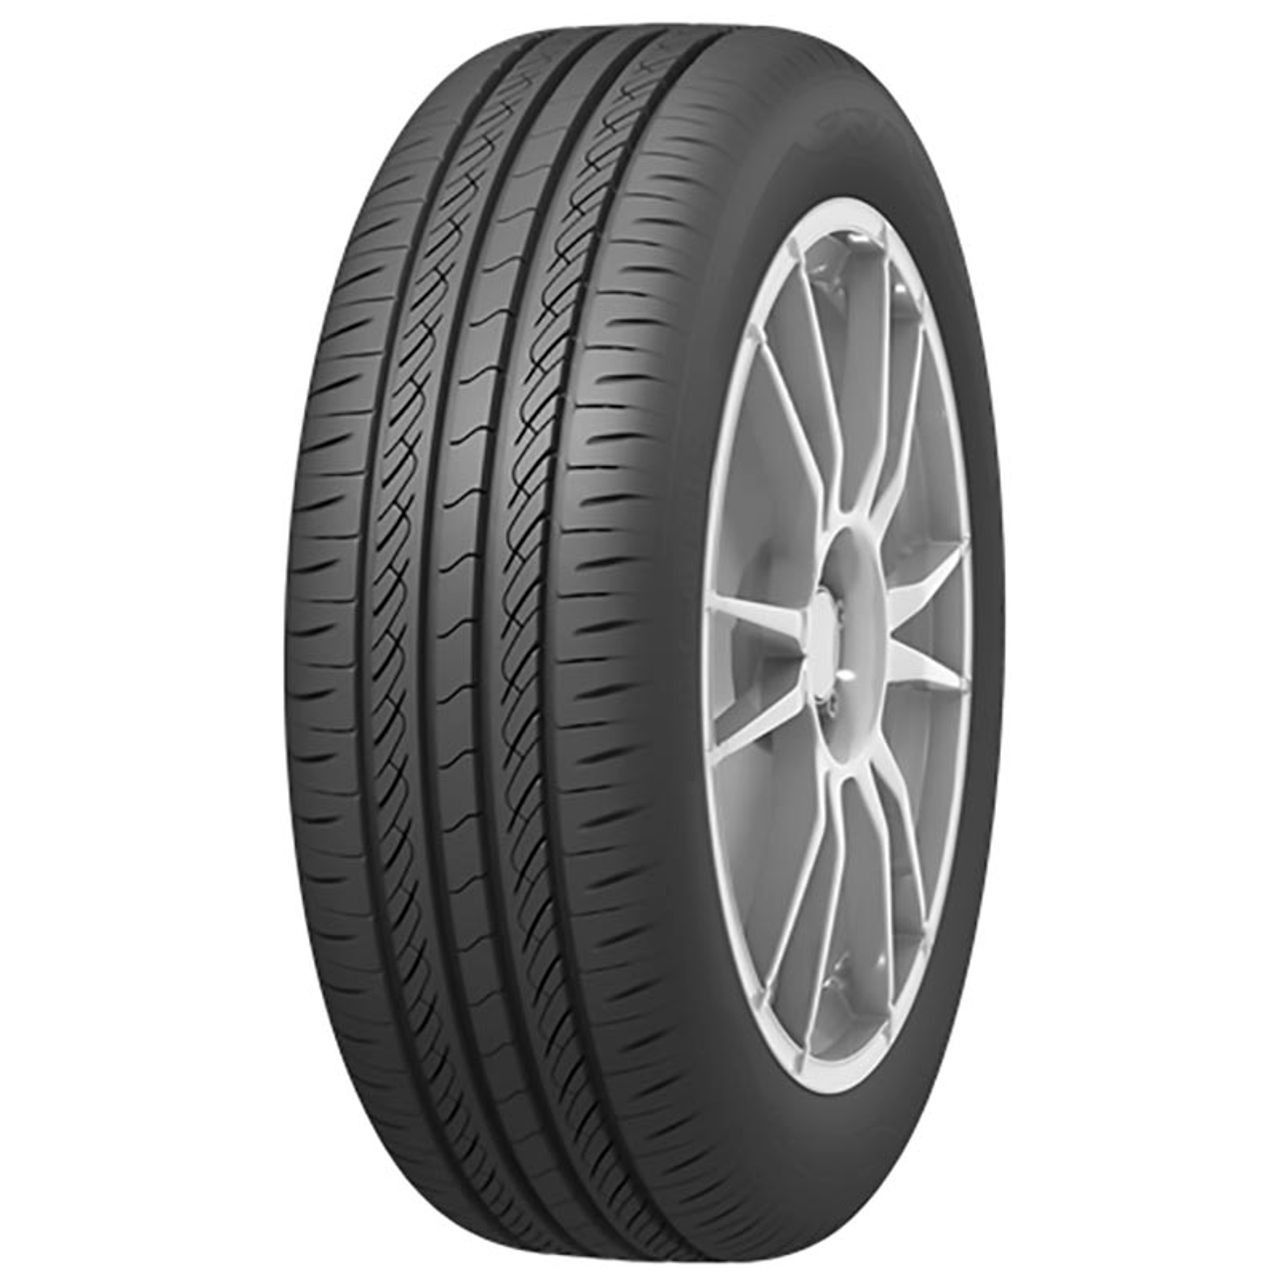 INFINITY ECOSIS 195/60R16 89V BSW